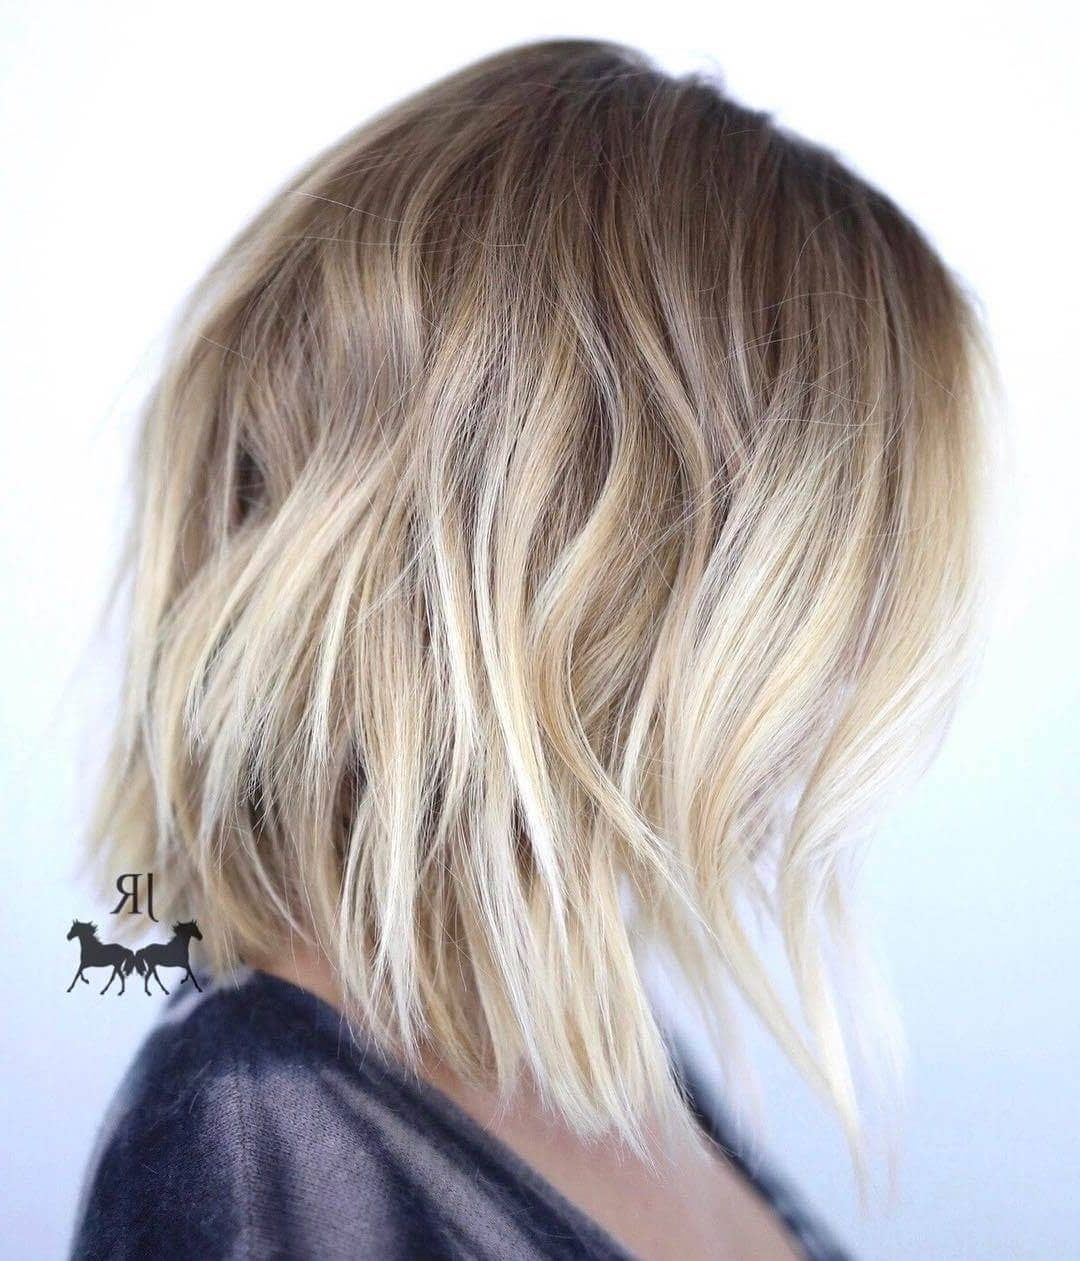 50 Fresh Short Blonde Hair Ideas To Update Your Style In 2018 With Dark Blonde Short Curly Hairstyles (View 14 of 25)